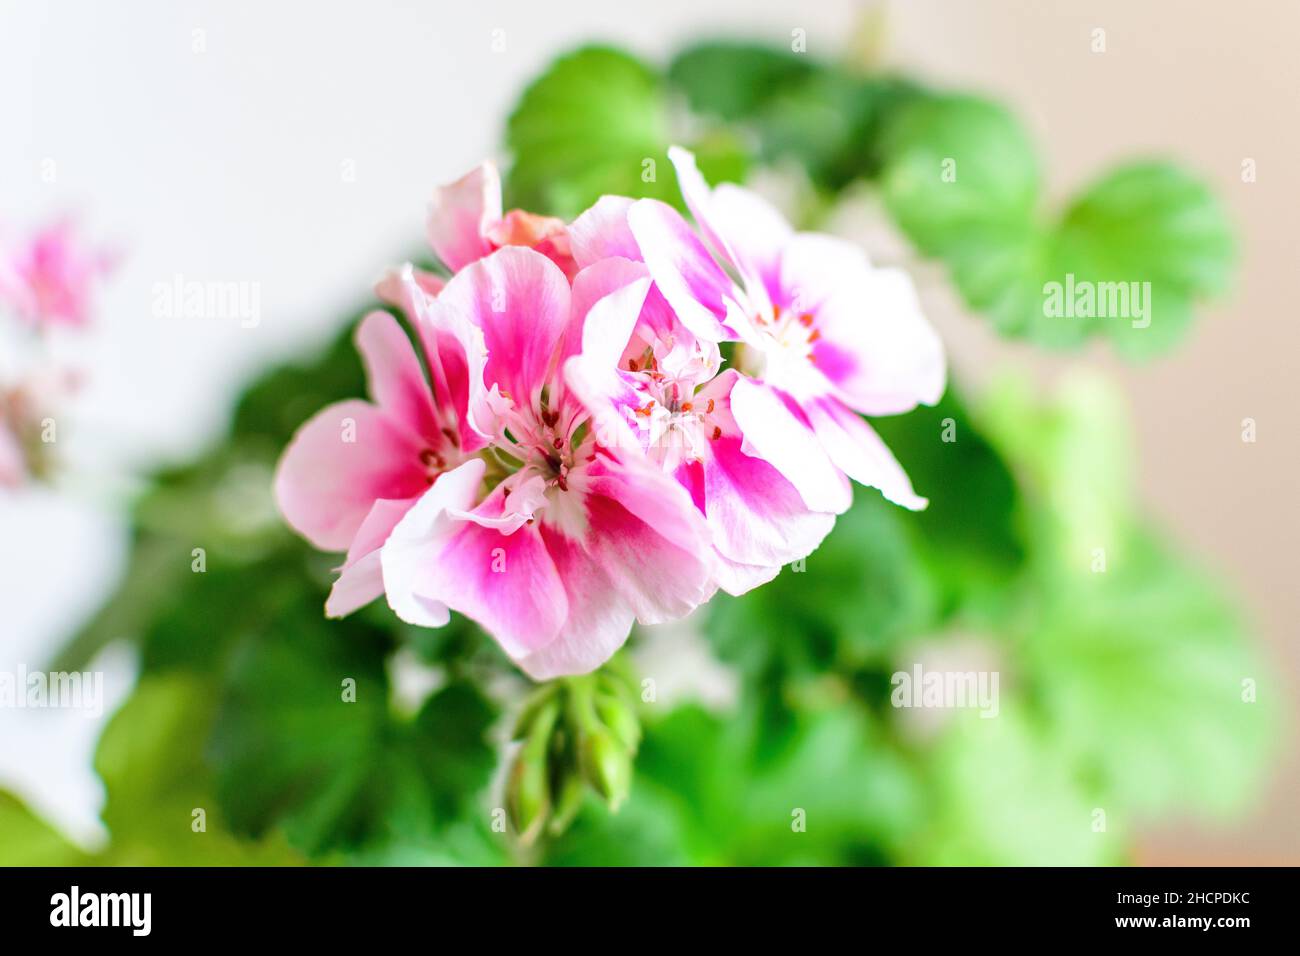 Group of vivid pink Pelargonium flowers (commonly known as geraniums, pelargoniums or storksbills) and fresh green leaves in a pot in a garden in a su Stock Photo